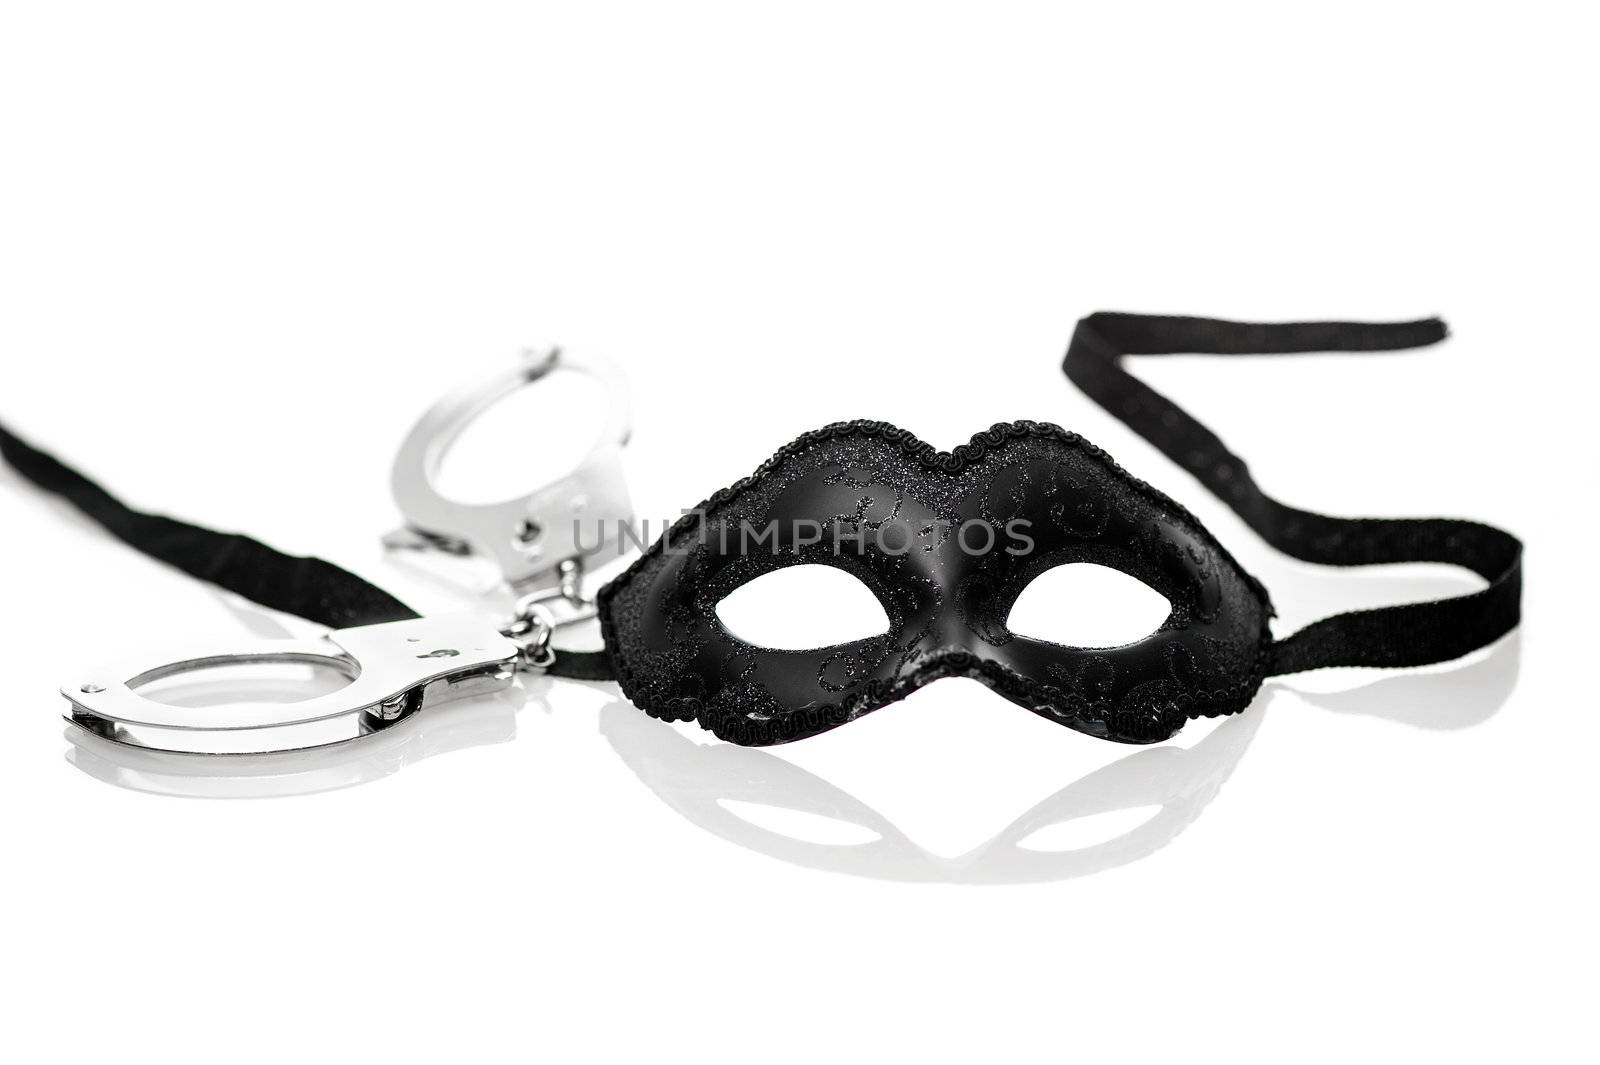 Black mask and handcuffs on white background by stockbymh